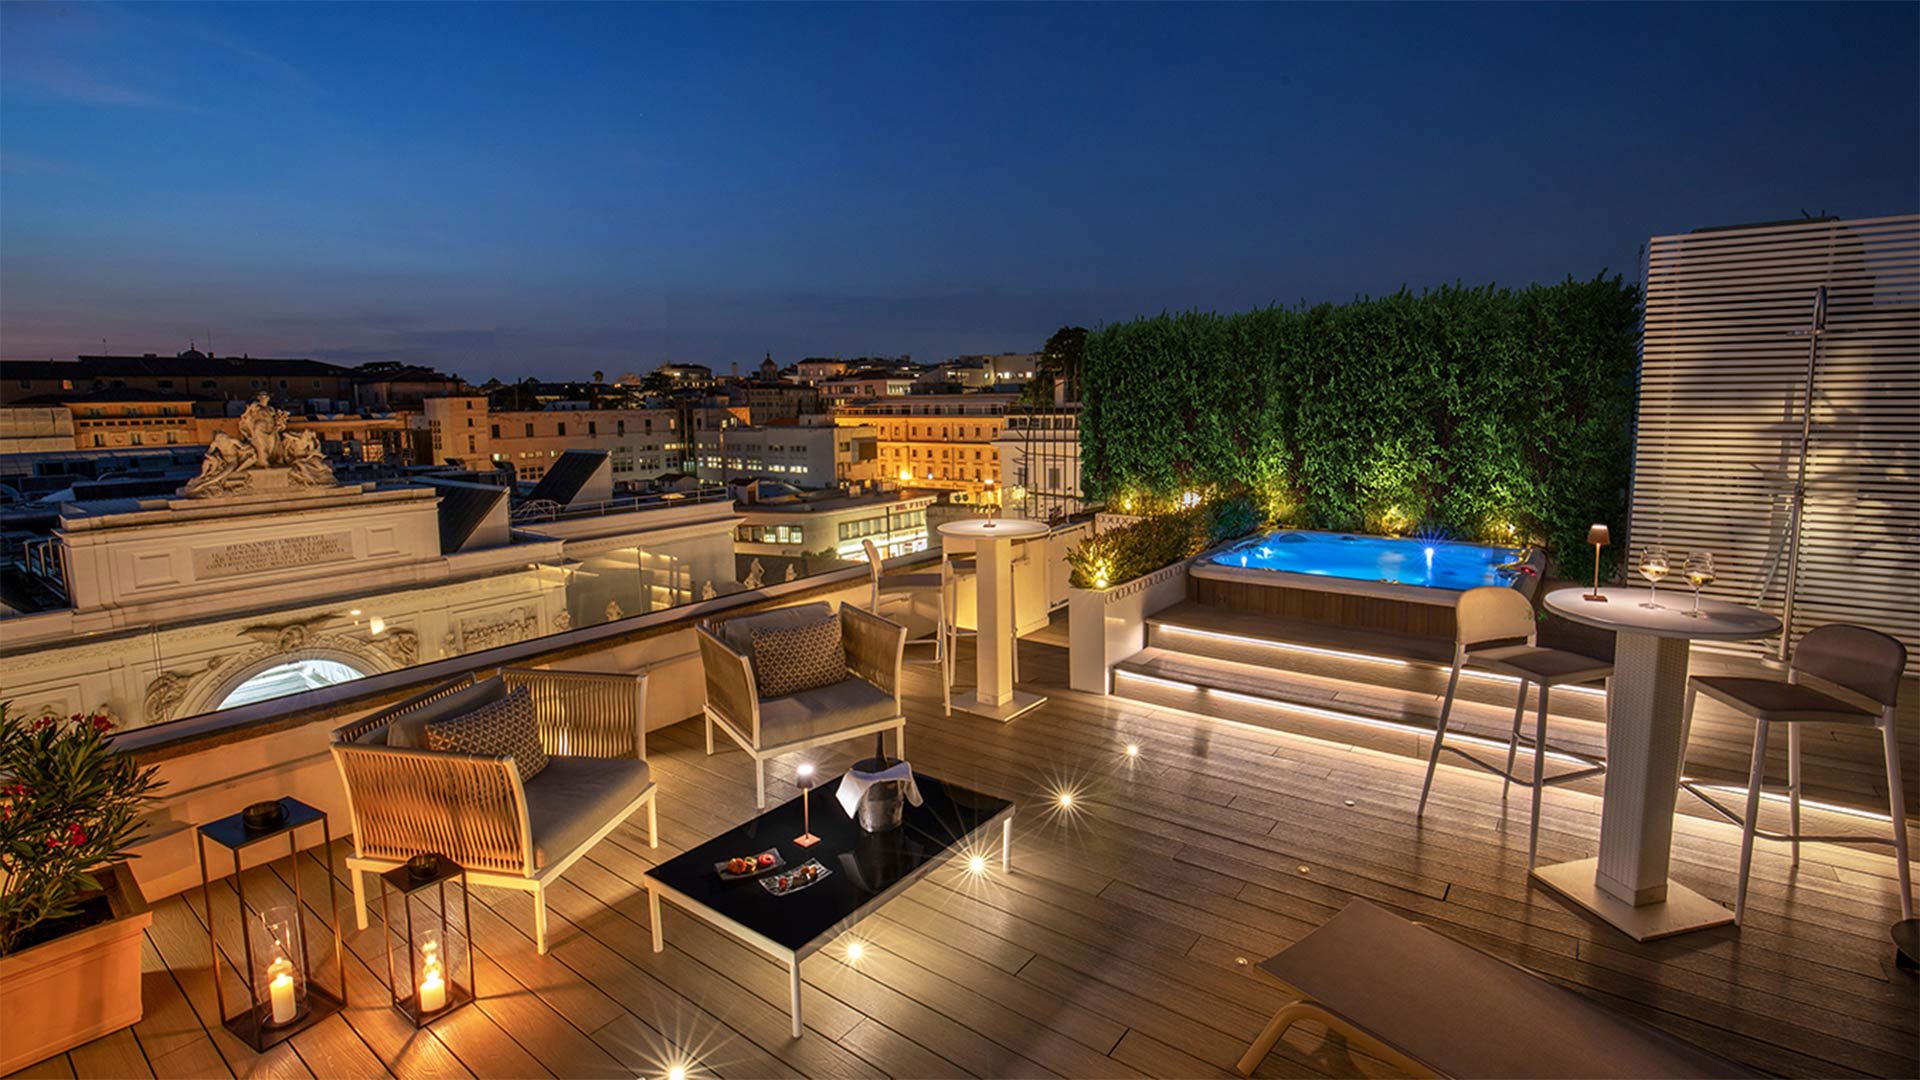 PRIVATE JACUZZI ROOFTOP